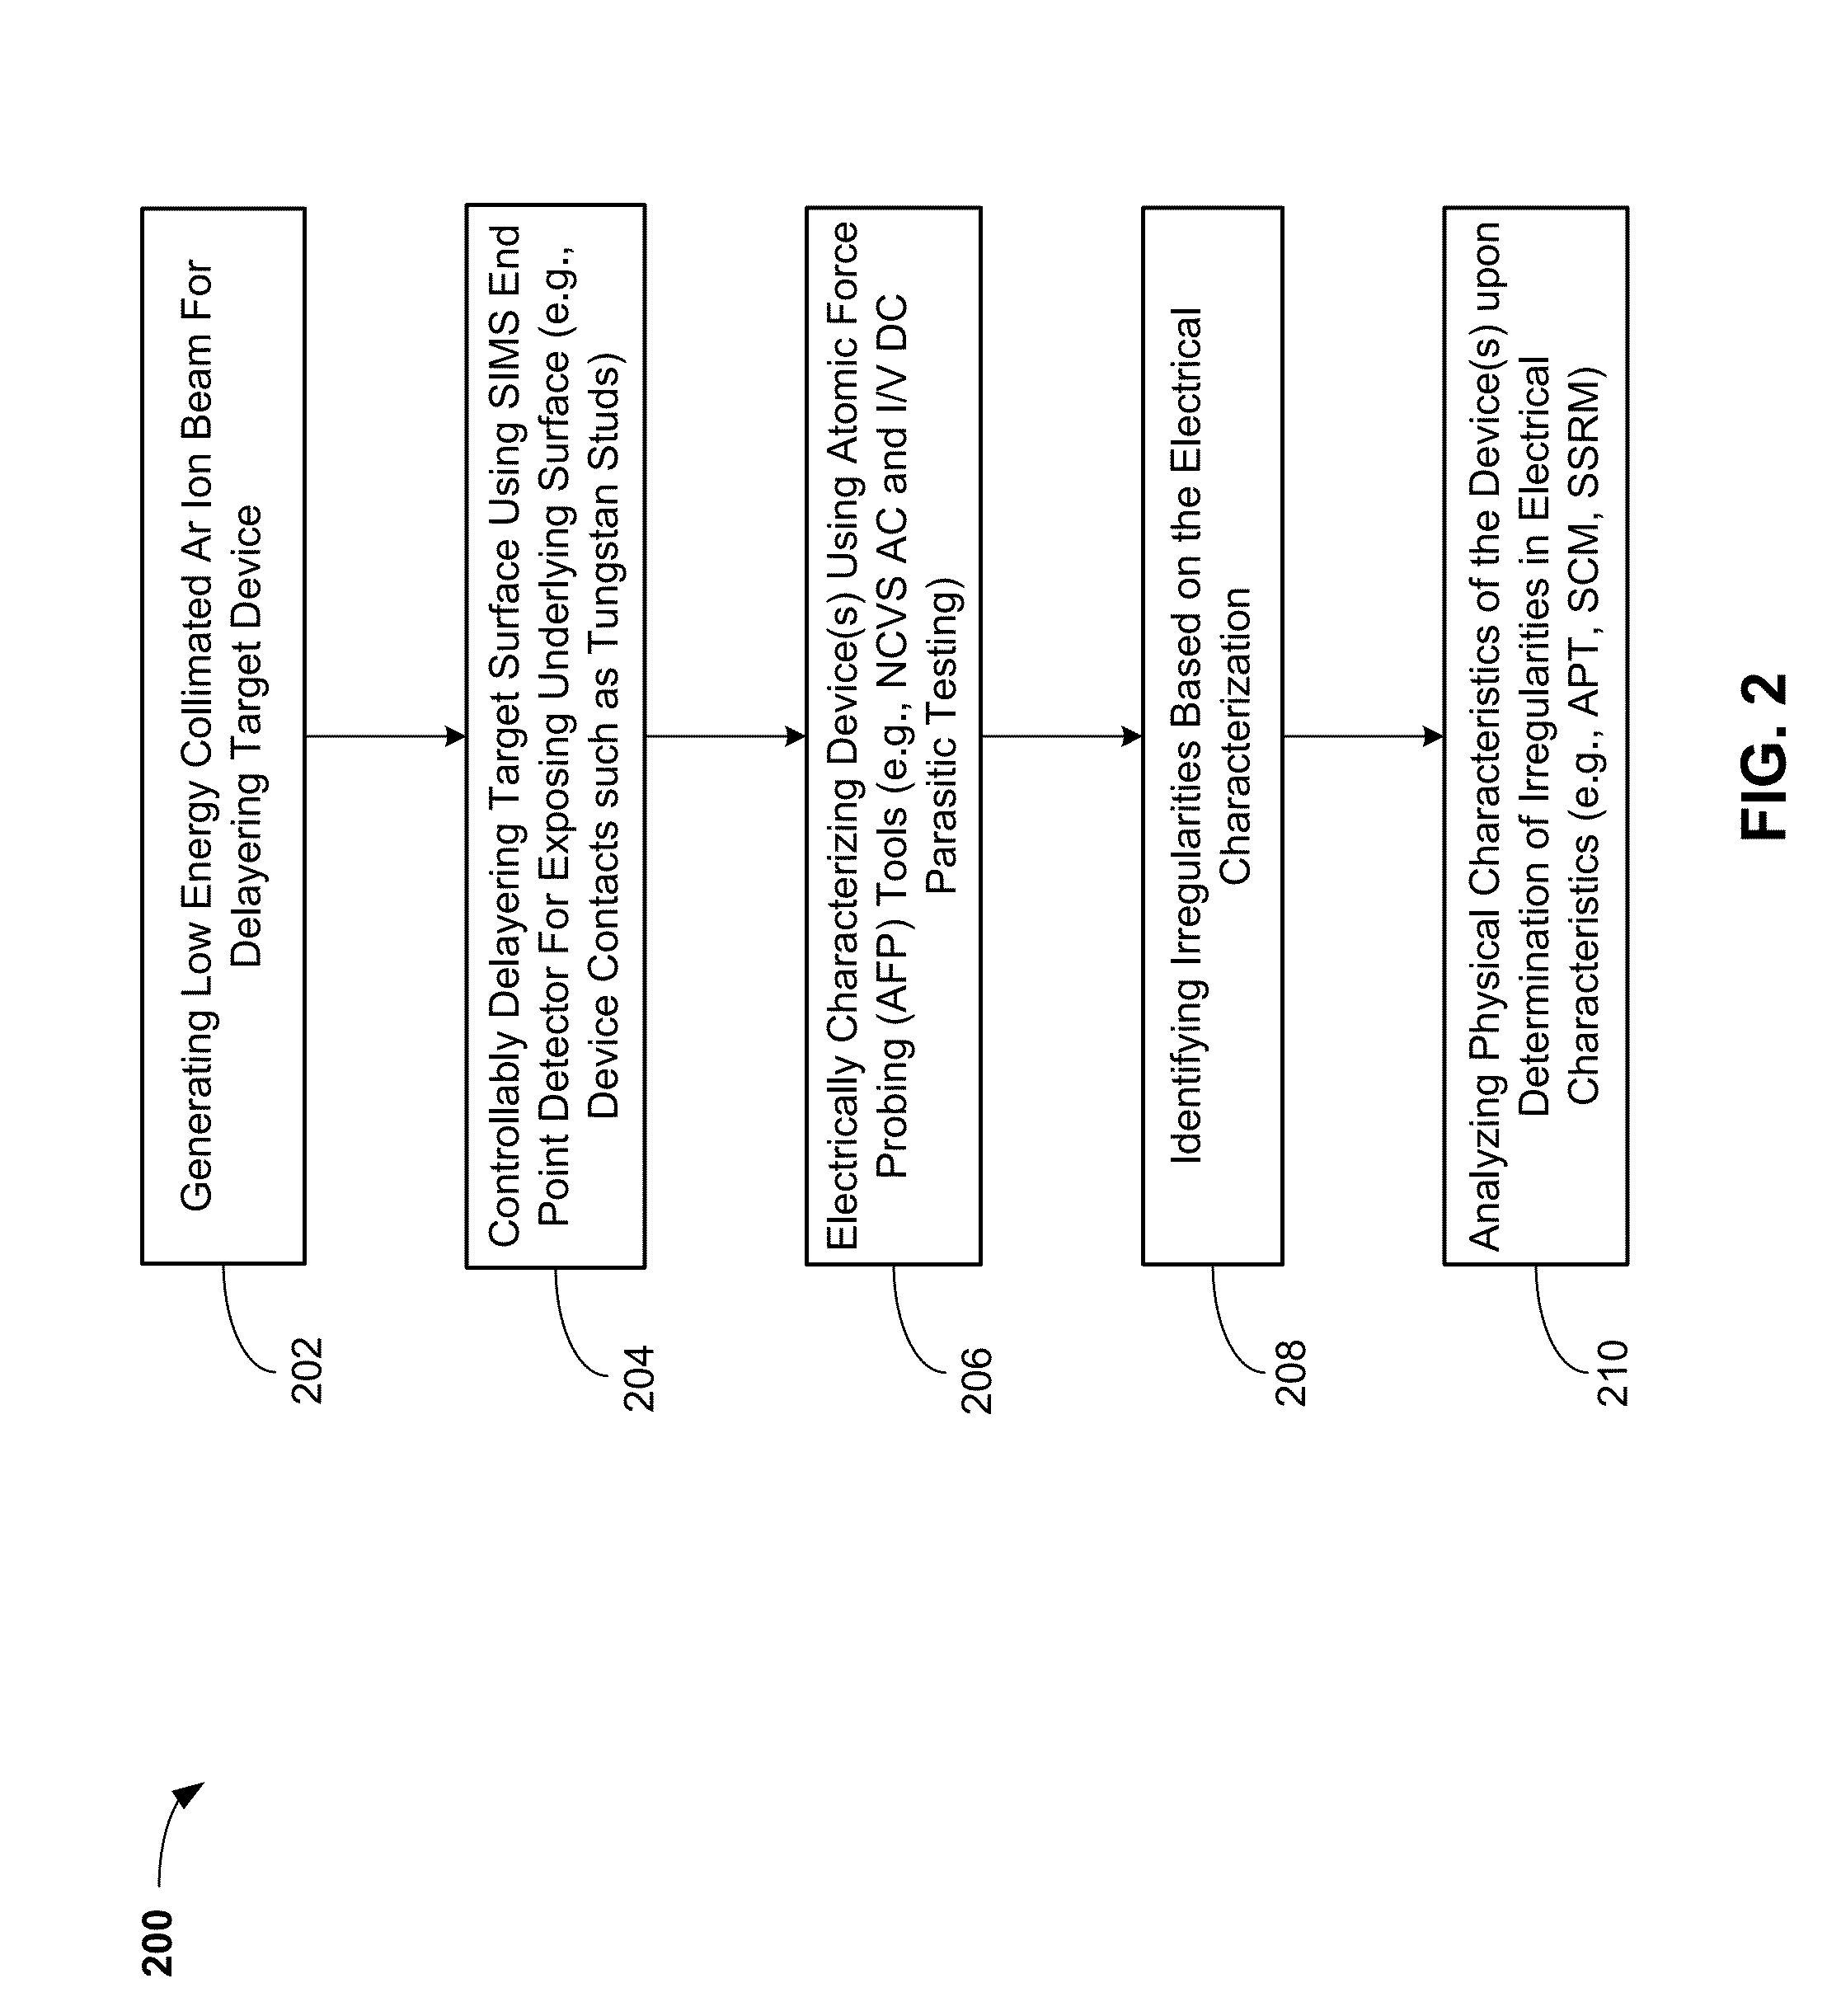 Atom probe tomography sample preparation for three-dimensional (3D) semiconductor devices